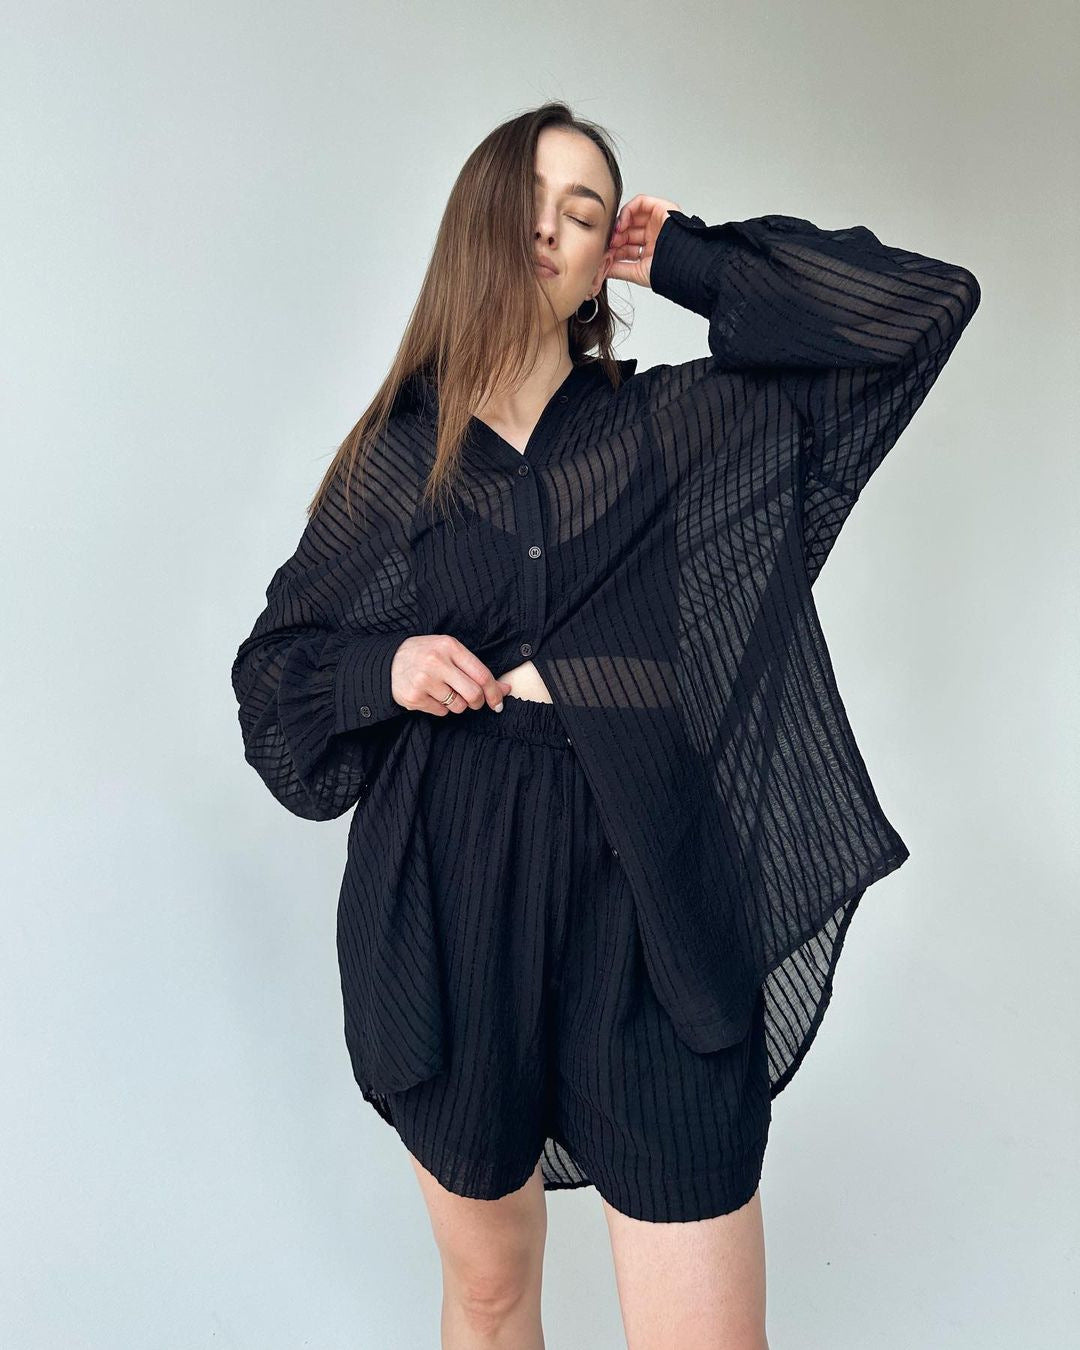 Women Clothing Suit Summer Casual Texture Long Sleeve Vertical Pattern Shirt Shorts Suit